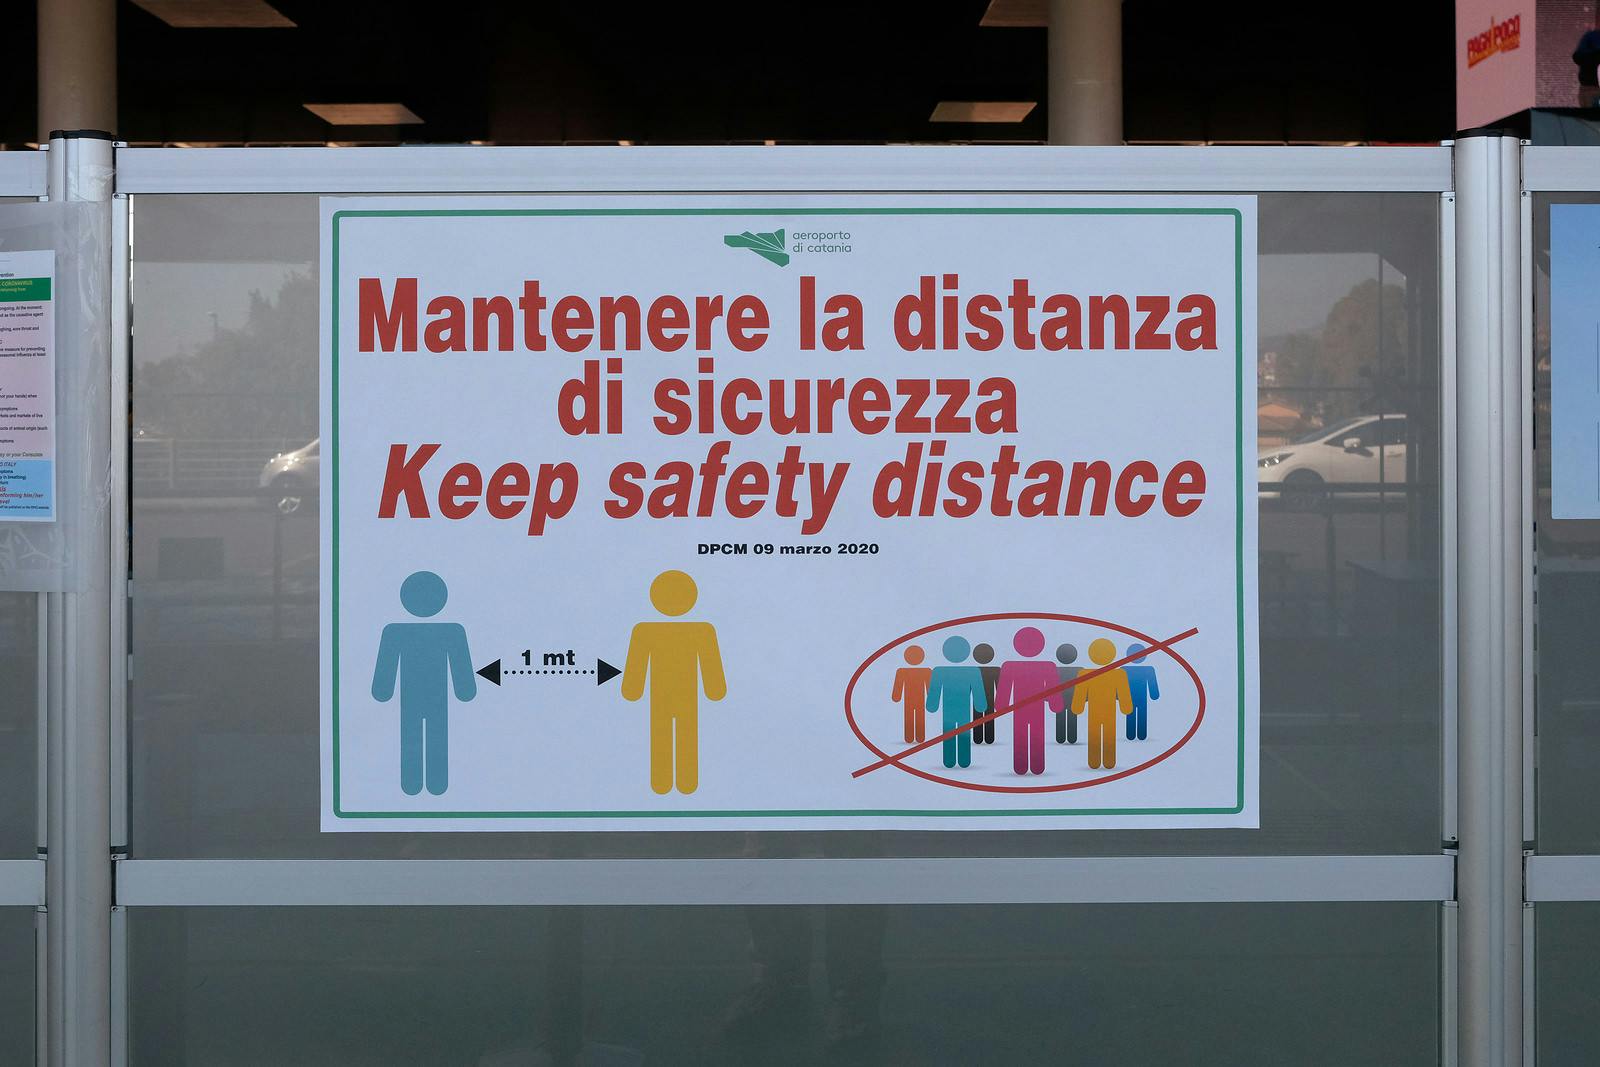 Catania, Italy &#8211; March 12, 2020: Coronavirus in Italy. Quarantine announcement about one meter distance between people as prevention mesure against Covid-19 virus epidemic in Italy
